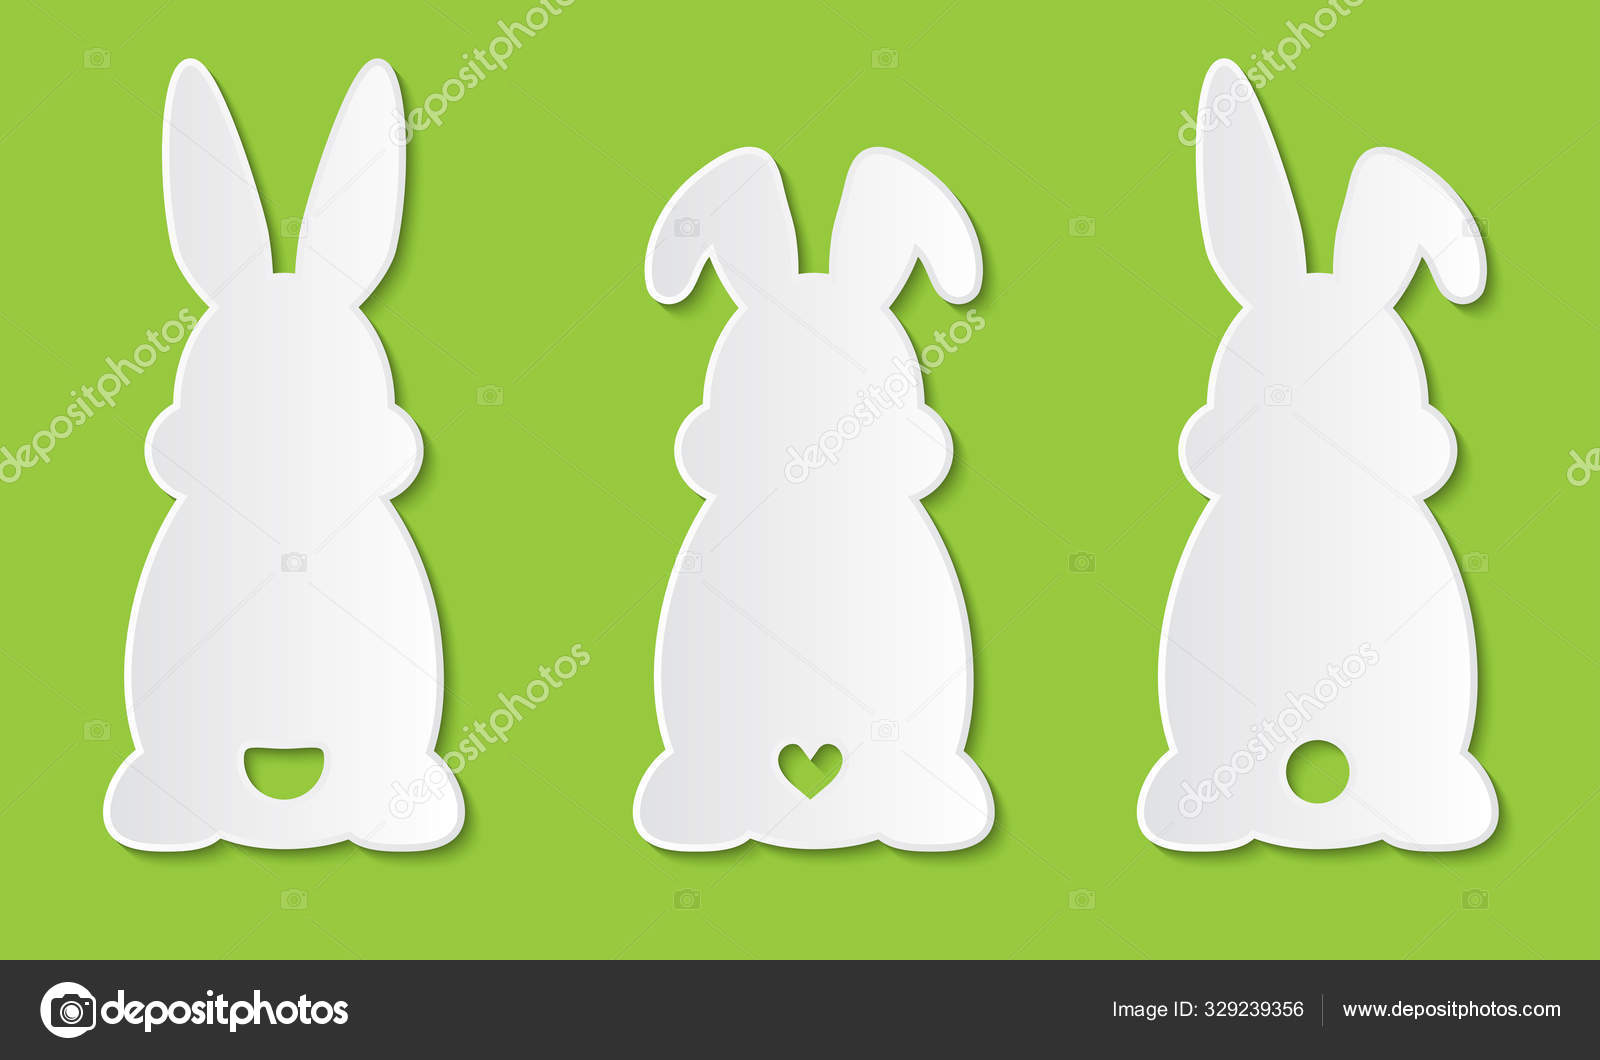 Laser cut template. Set of clipart Easter rabbits with ears and tail. For  Happy Easter hunt.